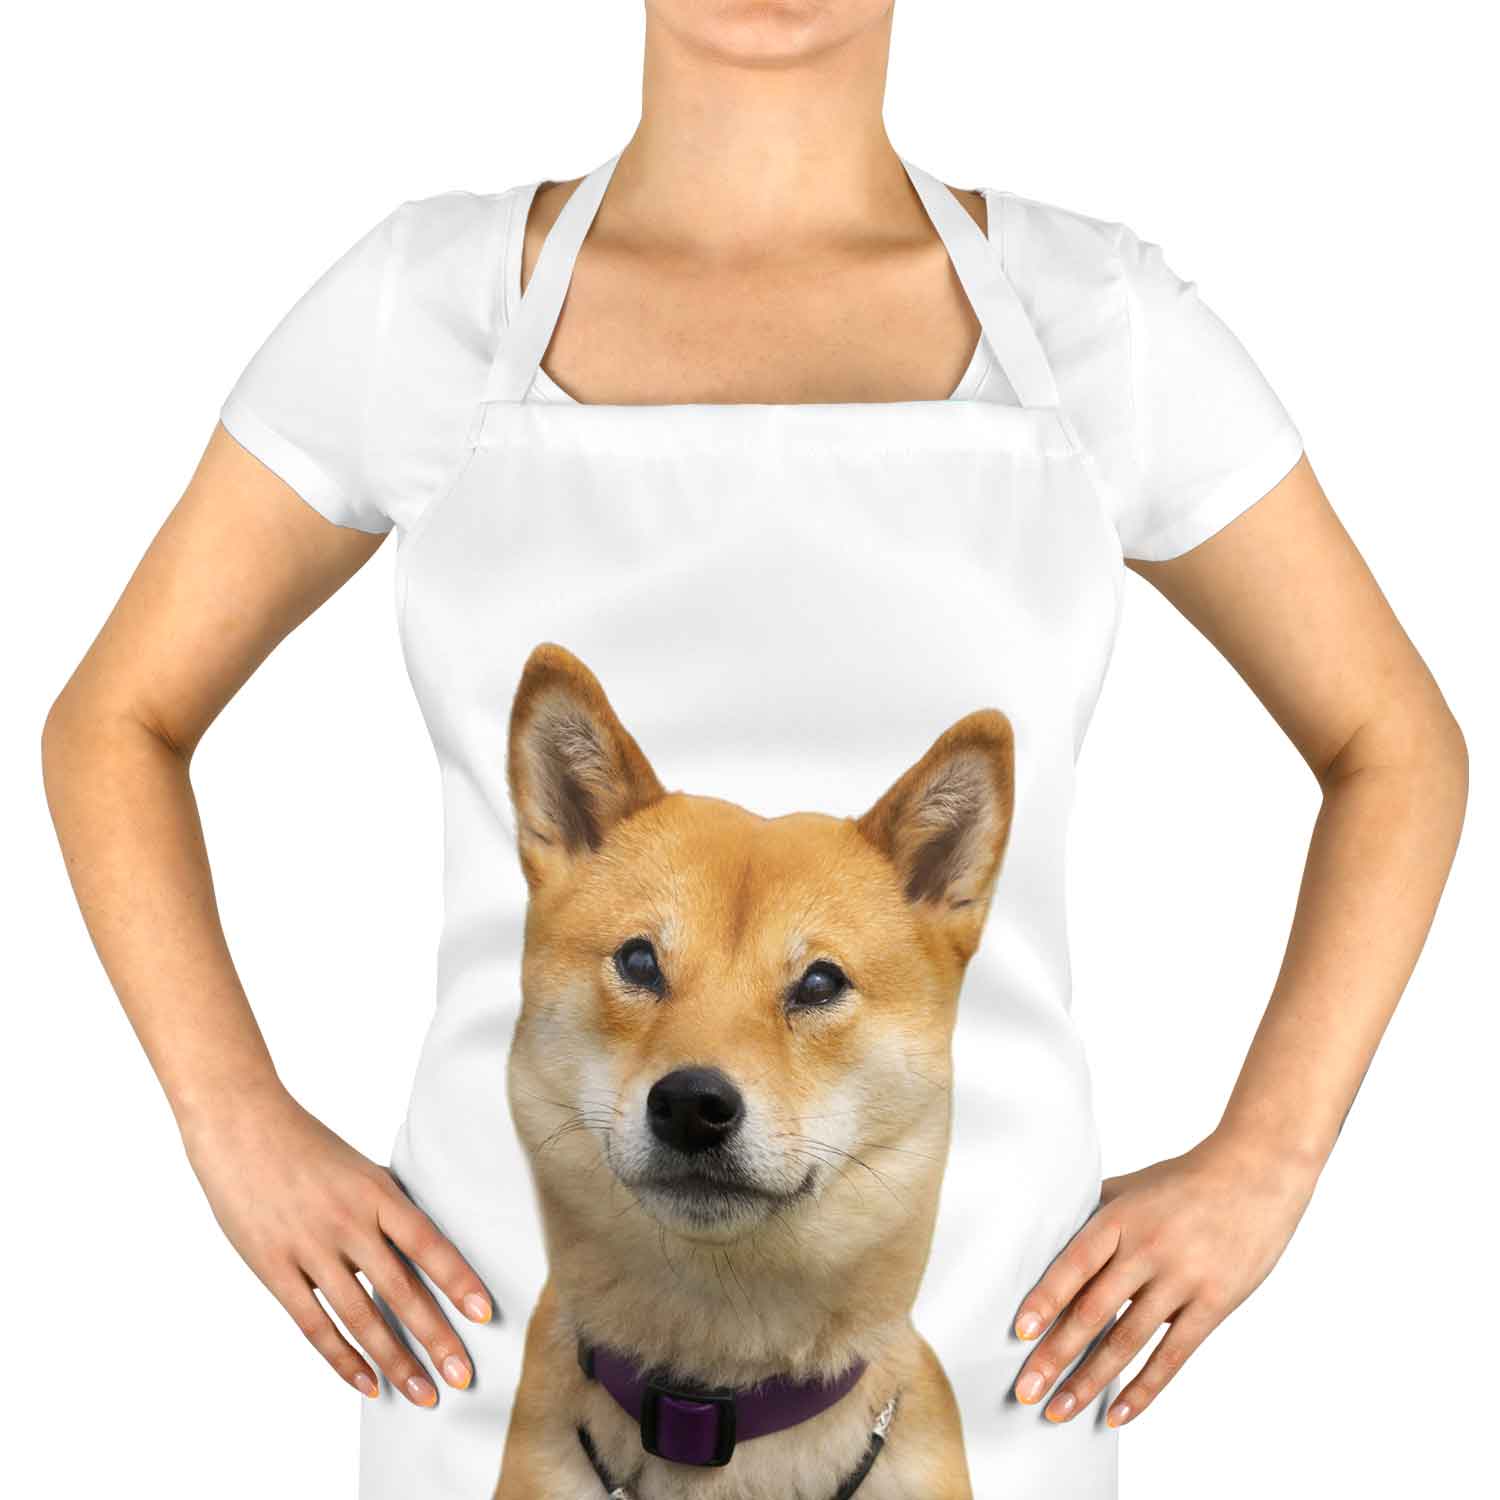 Your Dog Face Adults Apron